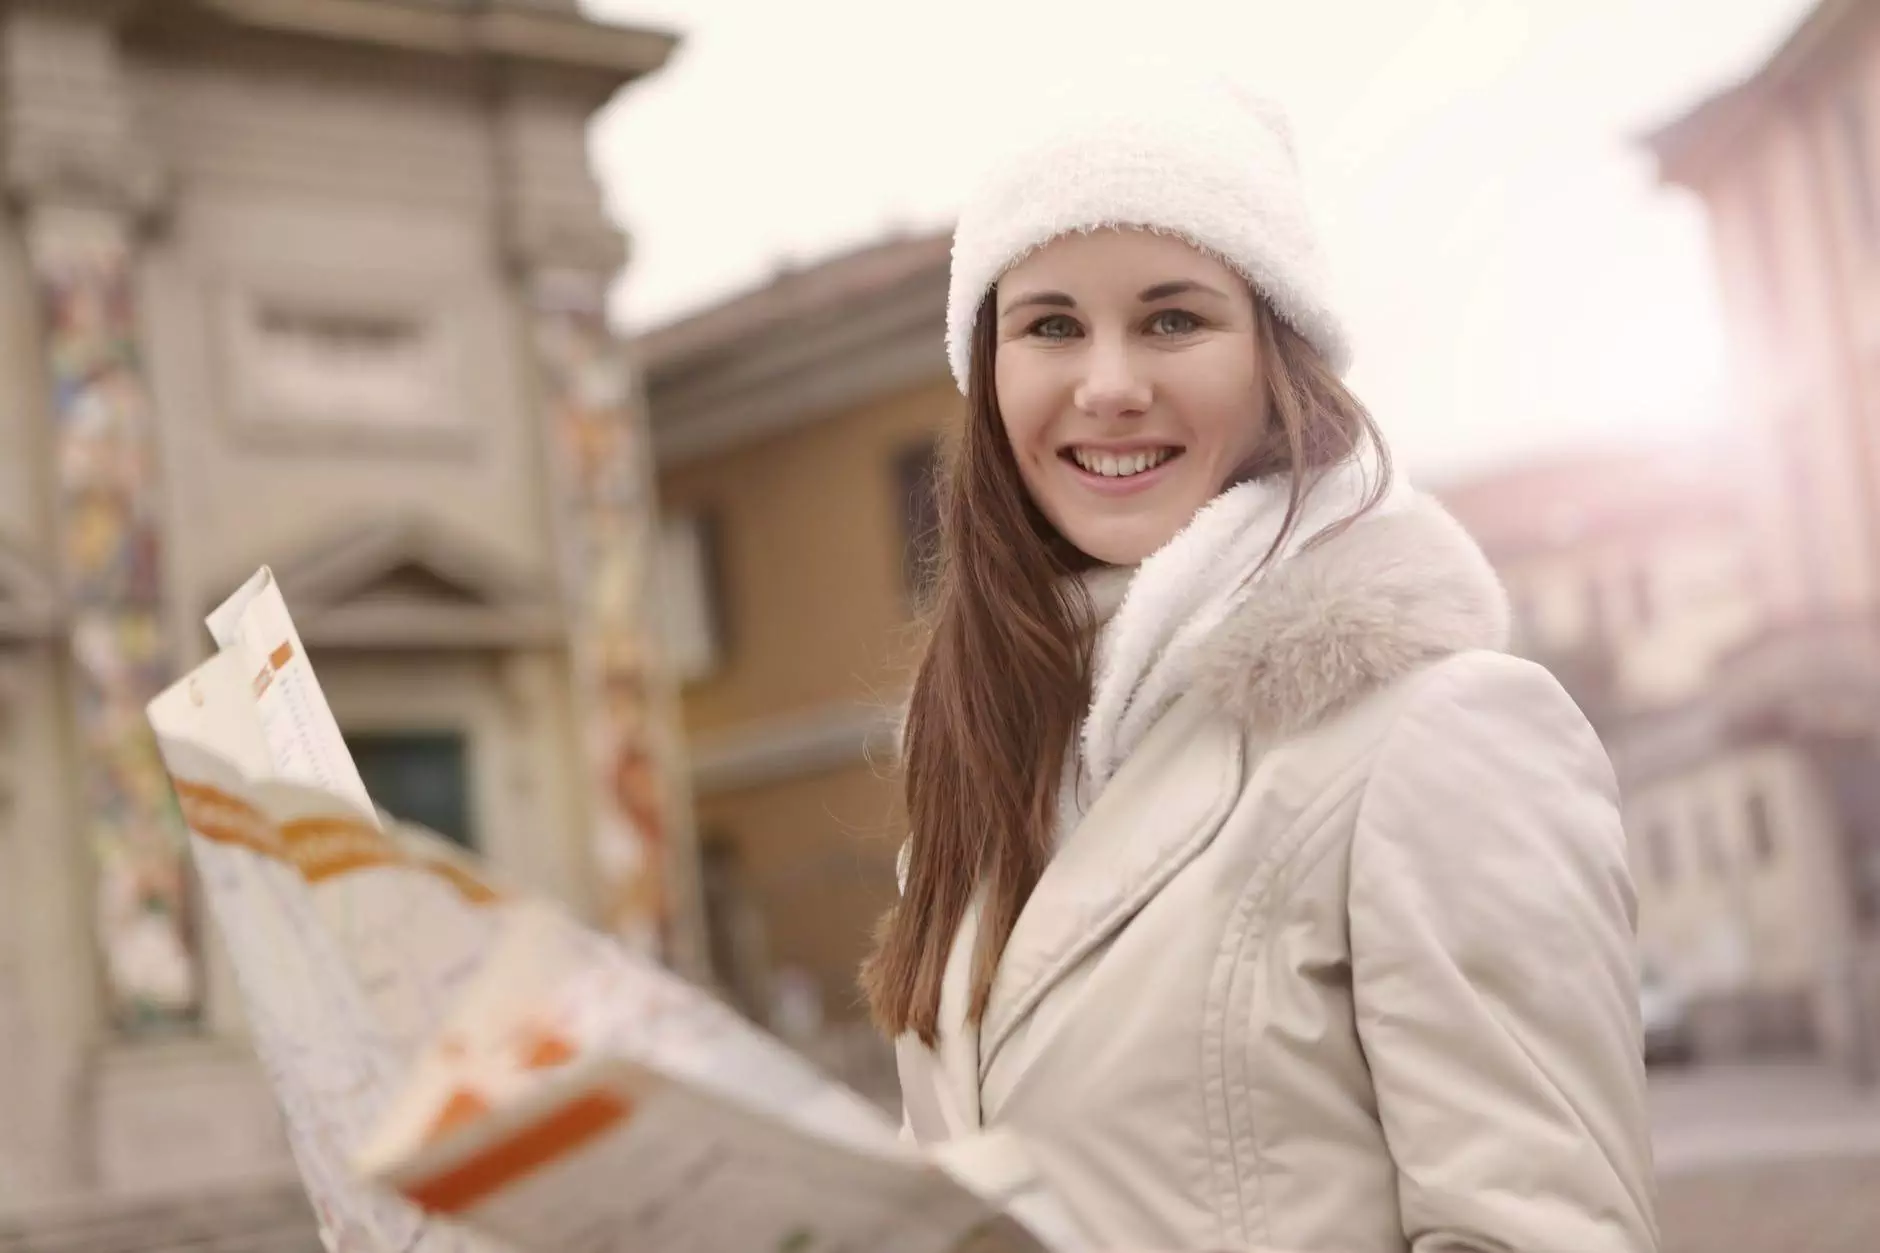 happy young woman with map smiling in street